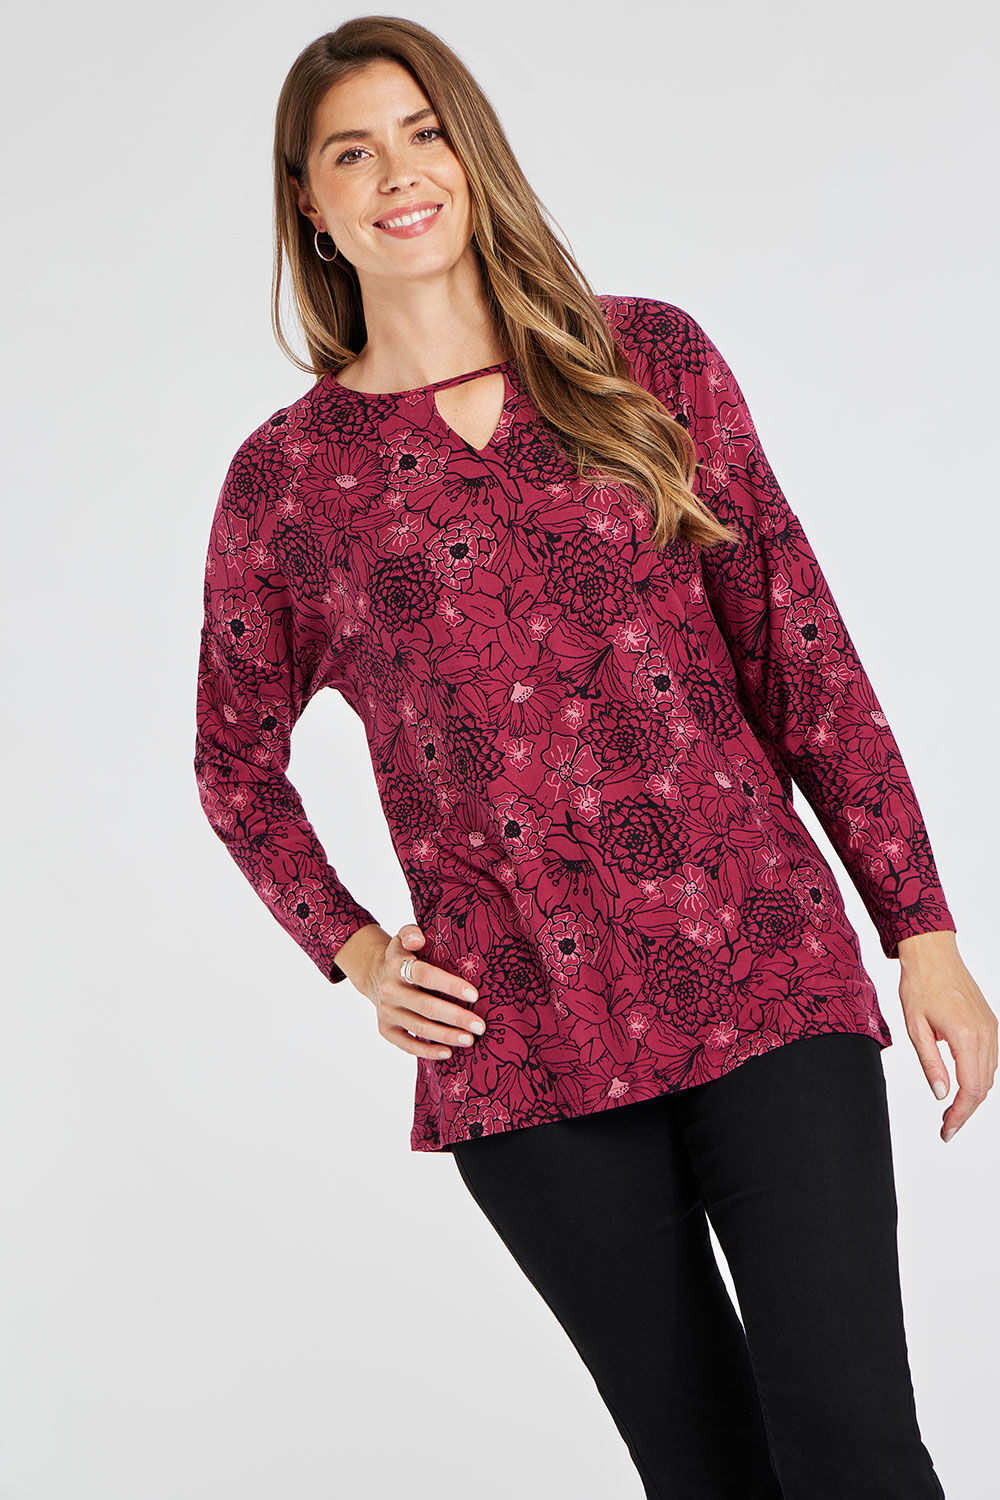 Bonmarche Burgundy Long Sleeve Floral Print Soft Touch Tunic, Size: 14